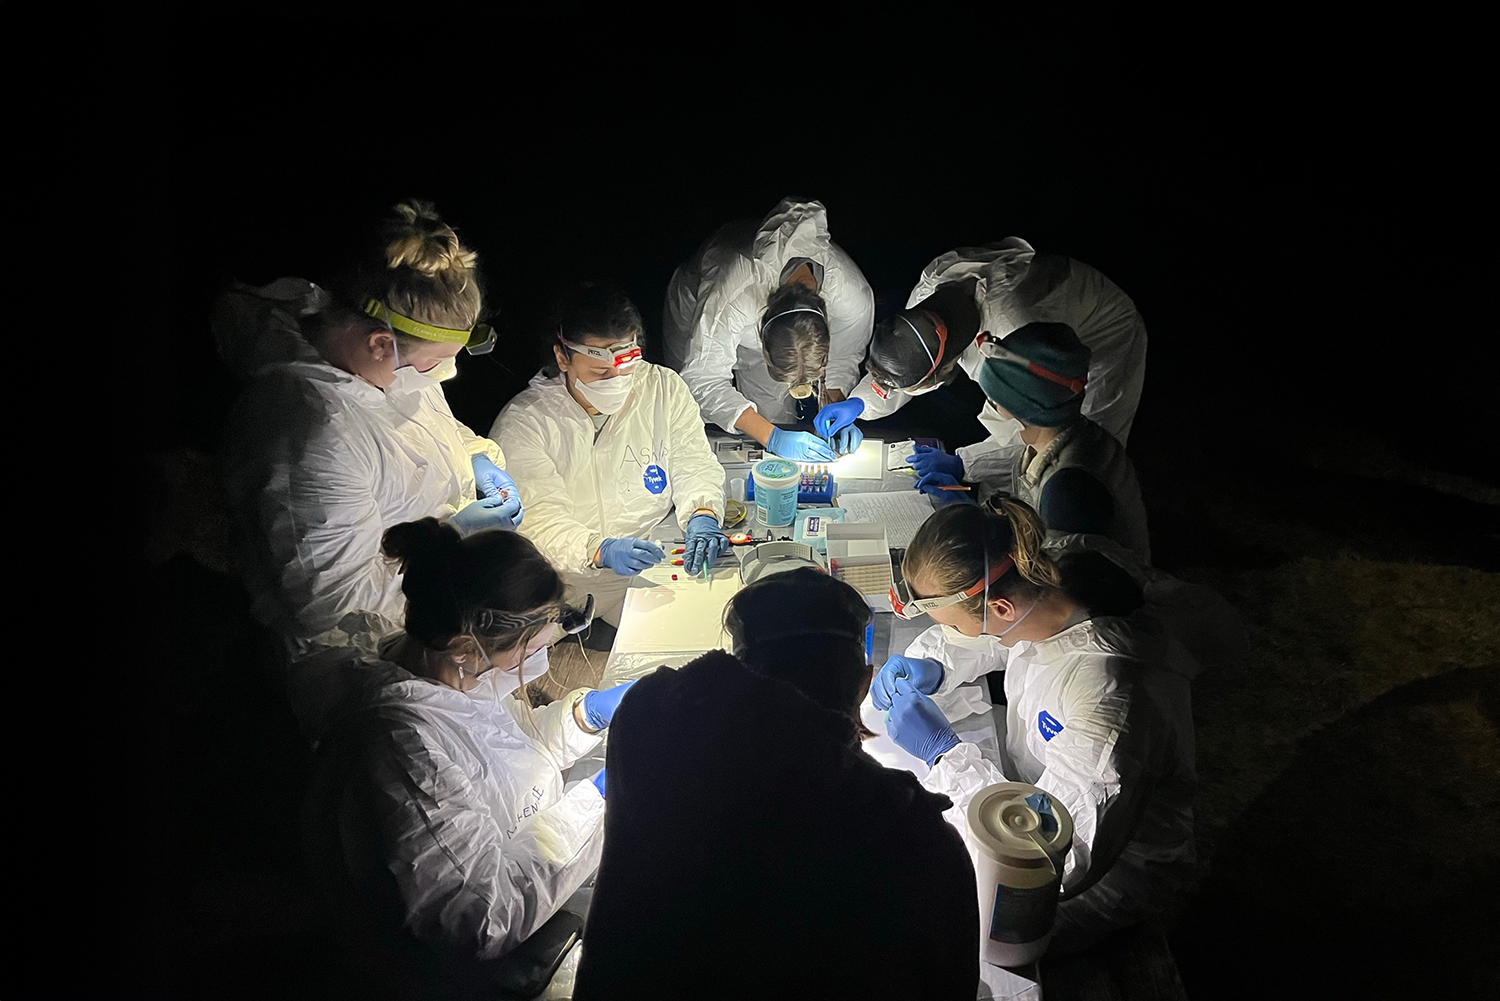 Eight people in Tyvek suits, N-95 masks, gloves, and headlamps gather around a table covered in science equipment and datasheets. Several are holding tiny brown bats.